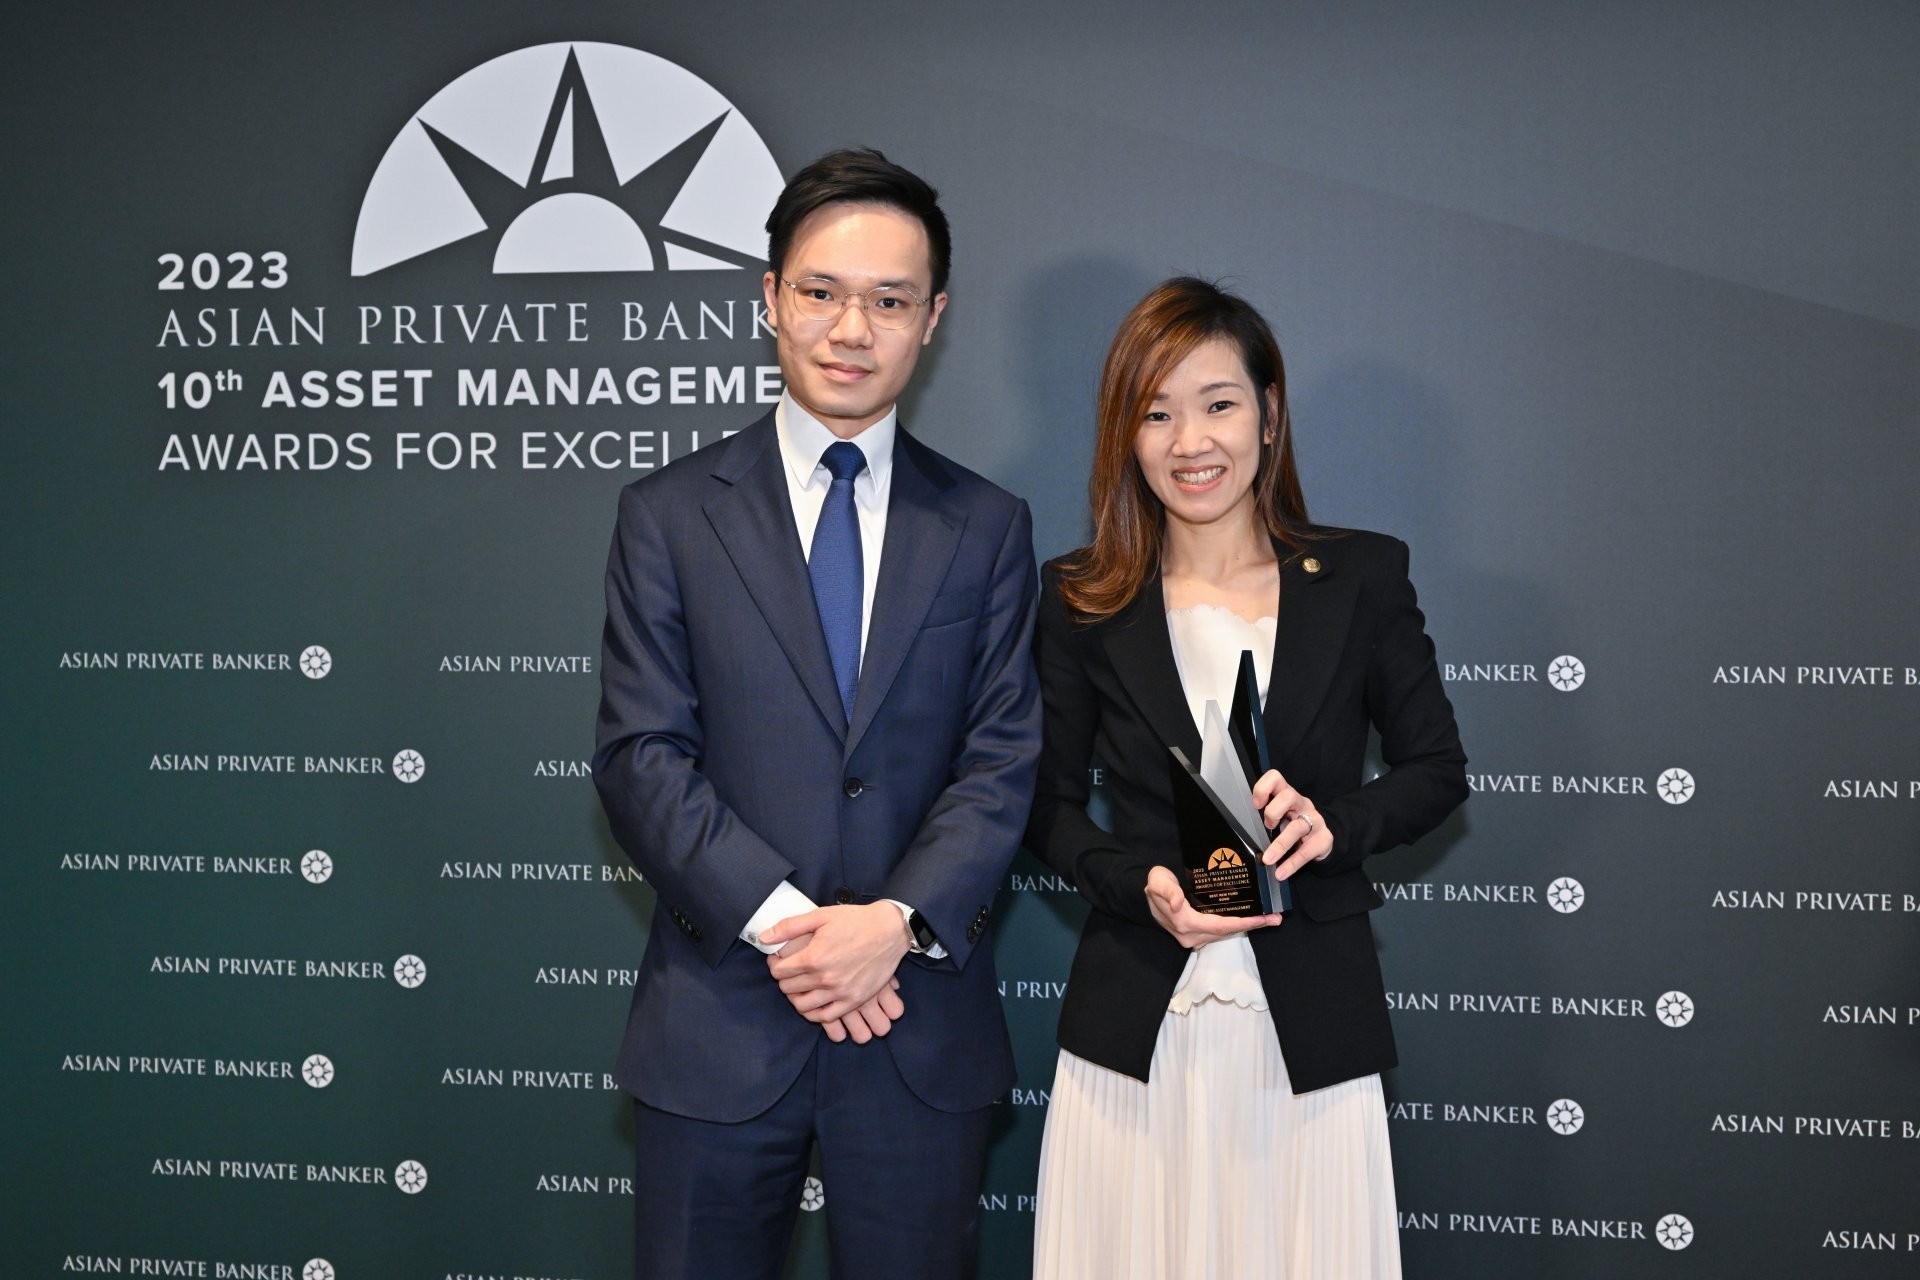 Keith Chan and Natalie Wong of Lazard Asset Management collect their trophy for Best New Fund - Bond